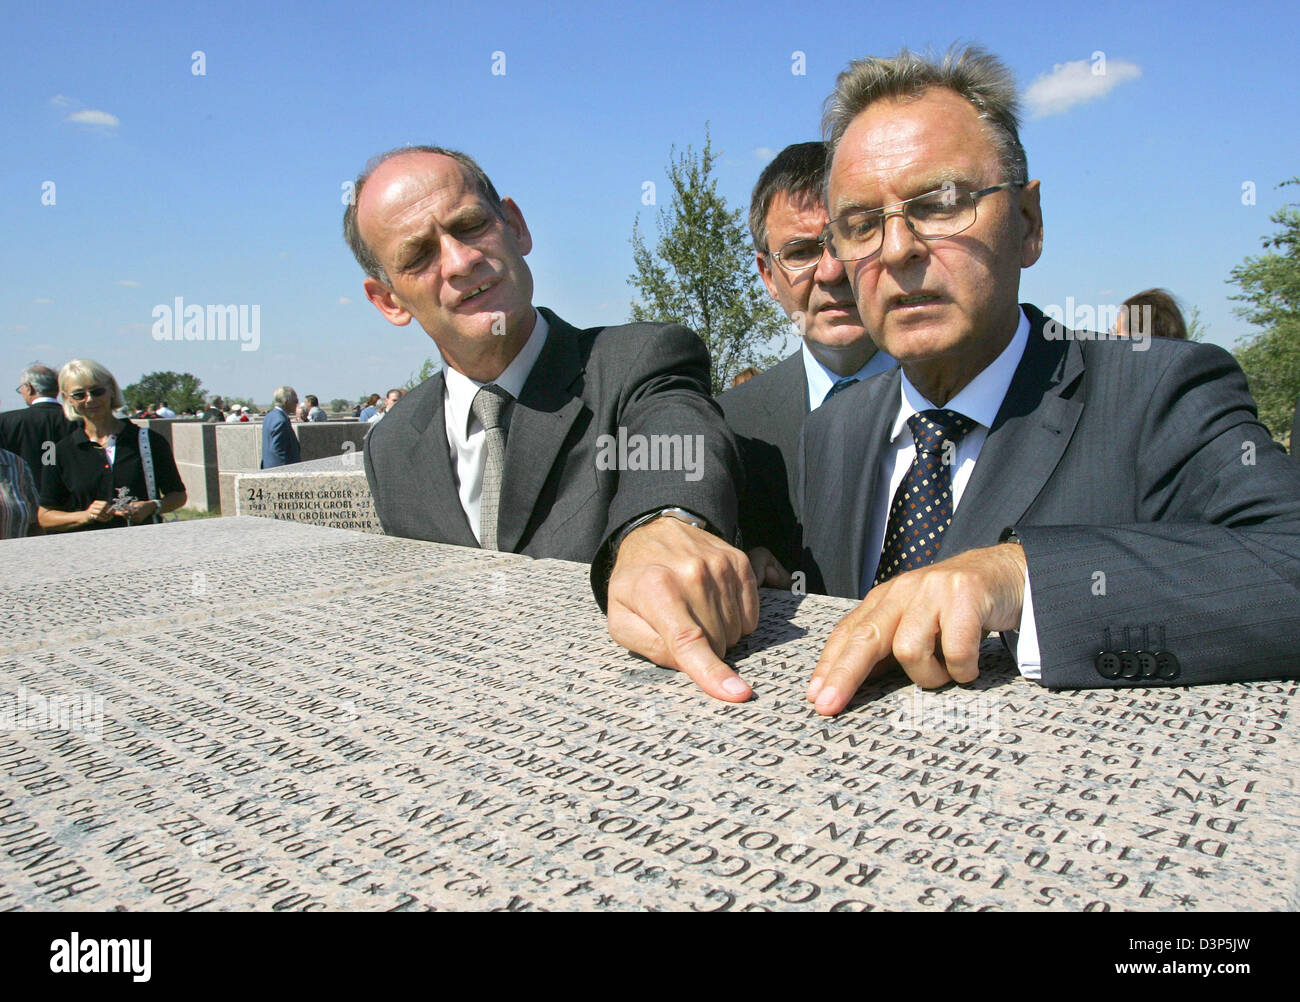 Hans-Juergen Papier (R), President of the Federal Constitutional Court of Germany, and Reinhard Fuehrer (C), Chairman of the 'Volksbund Deutsche Kriegsgraeberfuersorge', shown at the military cemetary for German soldiers in Rossoschka near Wolgograd (former Stalingrad), Russian Federation, Saturday, 9 September 2006. The cemetary was inaugurated on this day. Photo: Uwe Zucchi Stock Photo